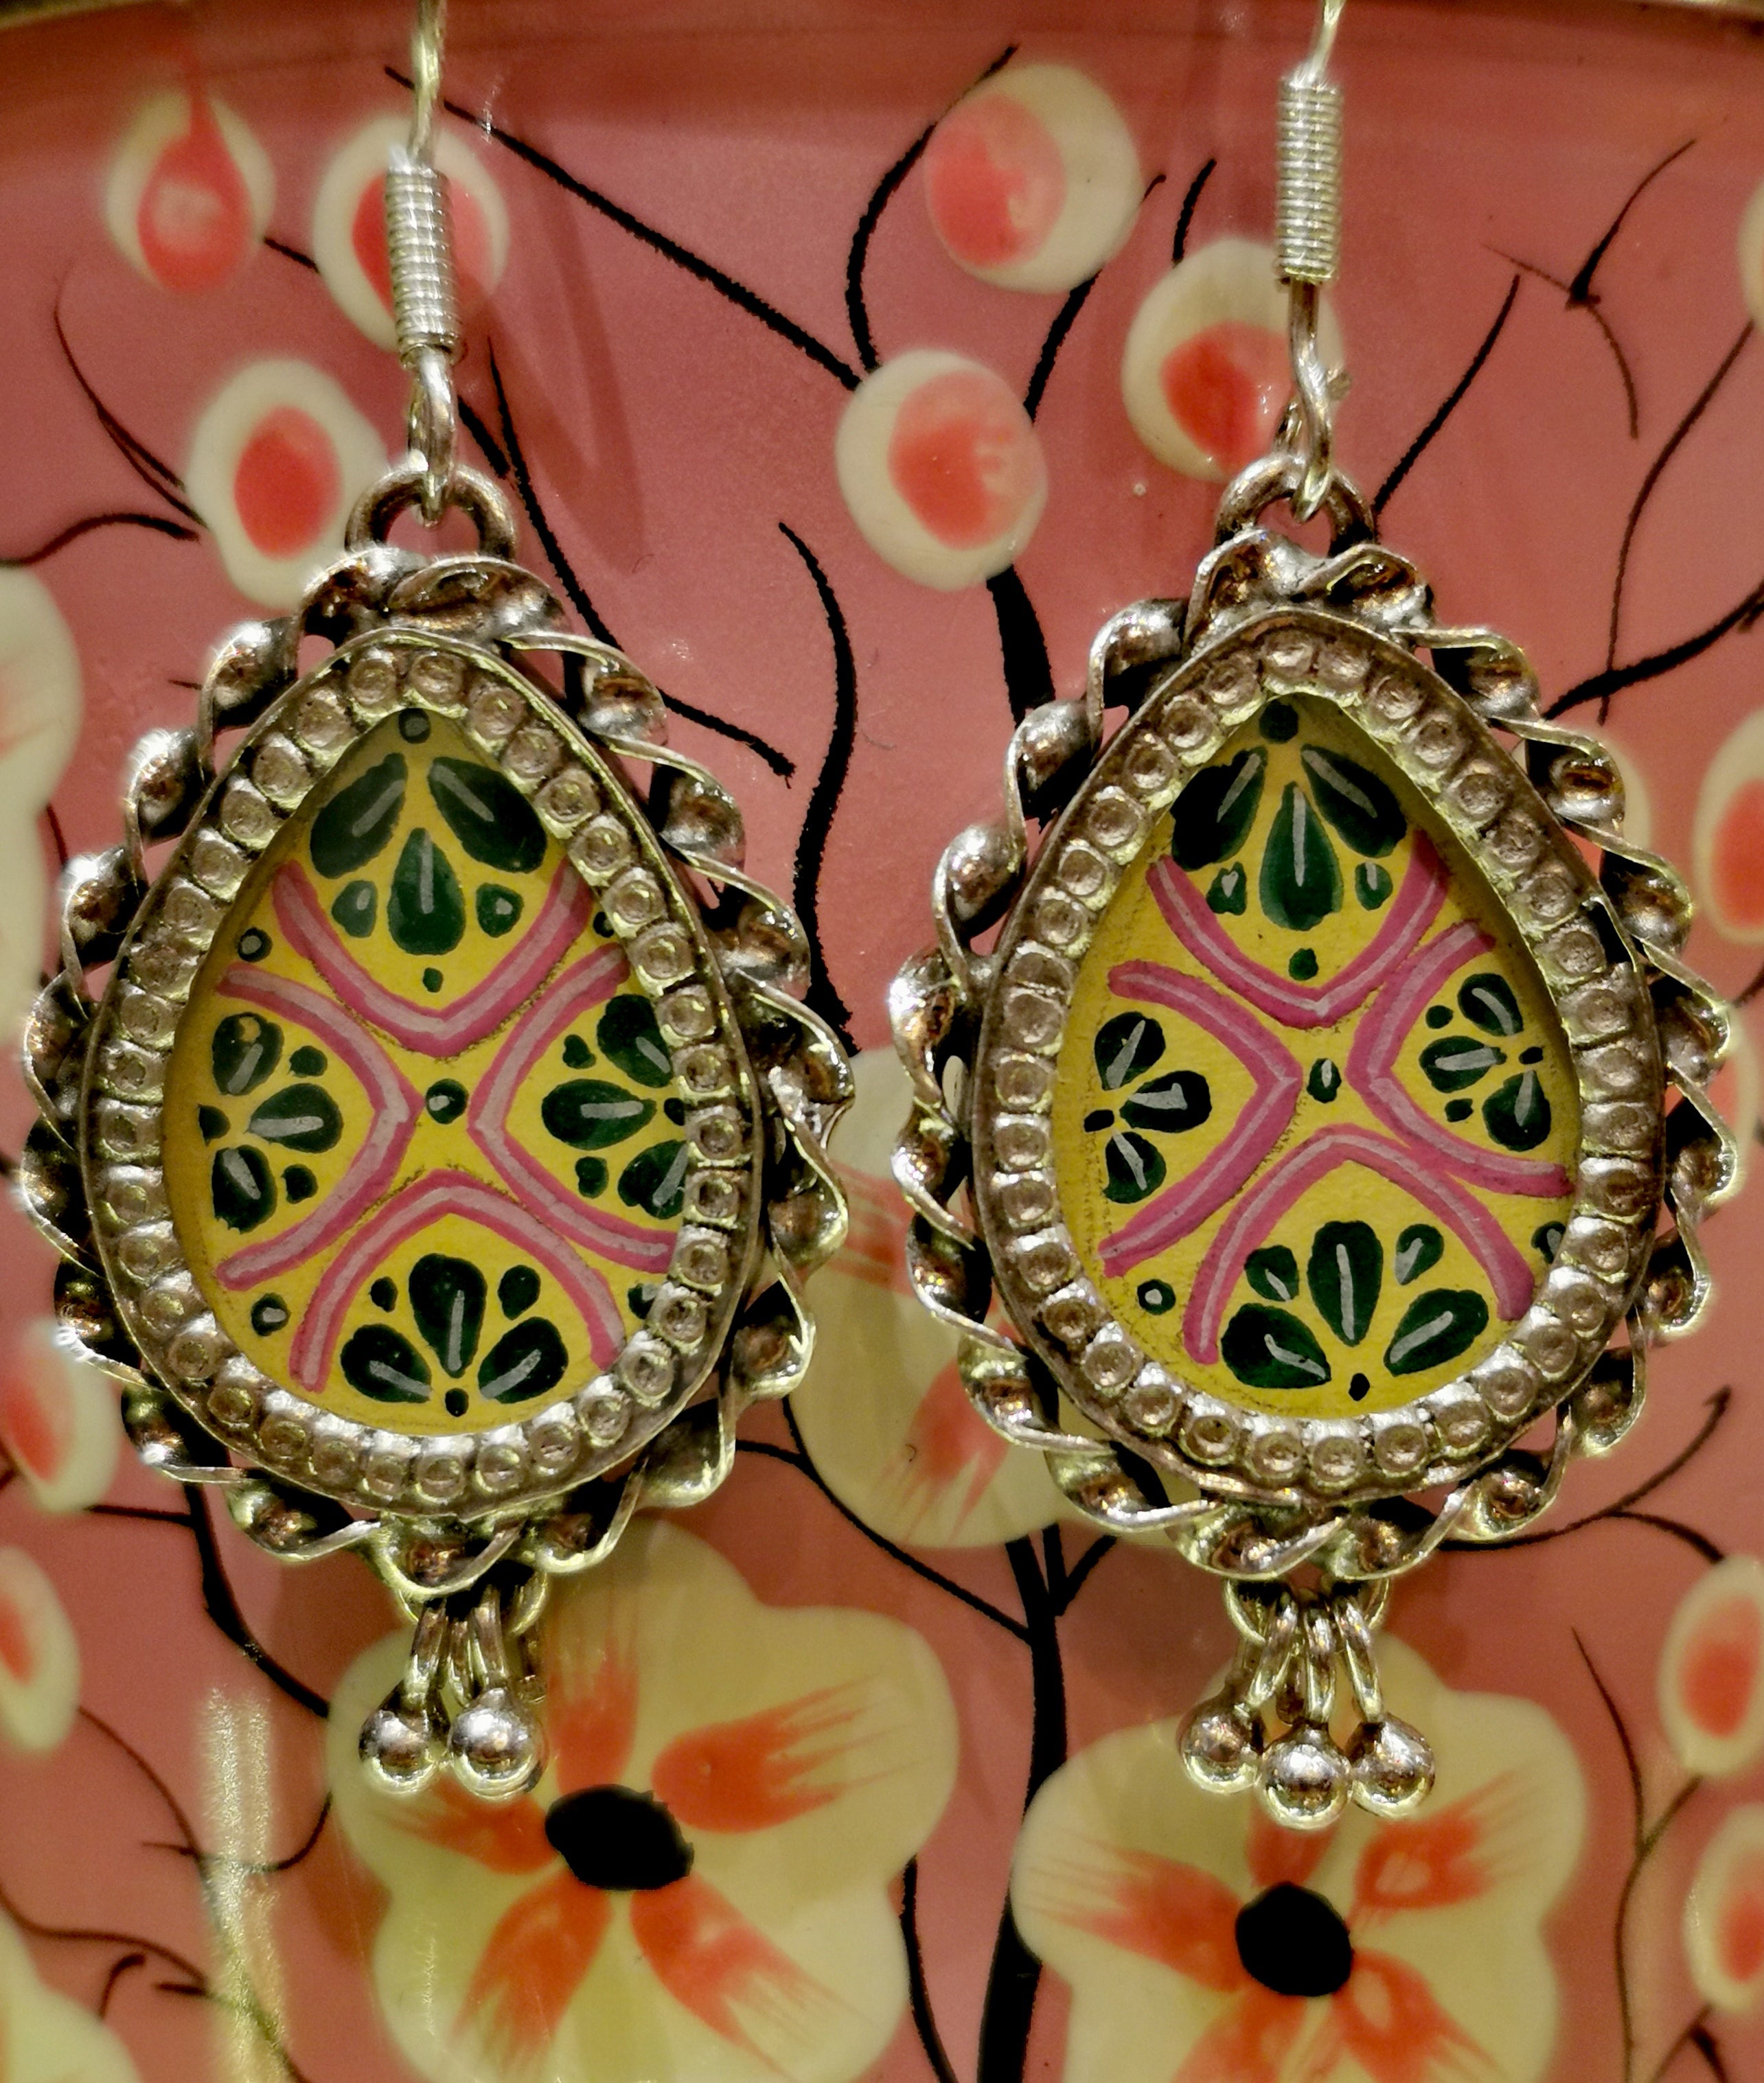 Mughal painted florals